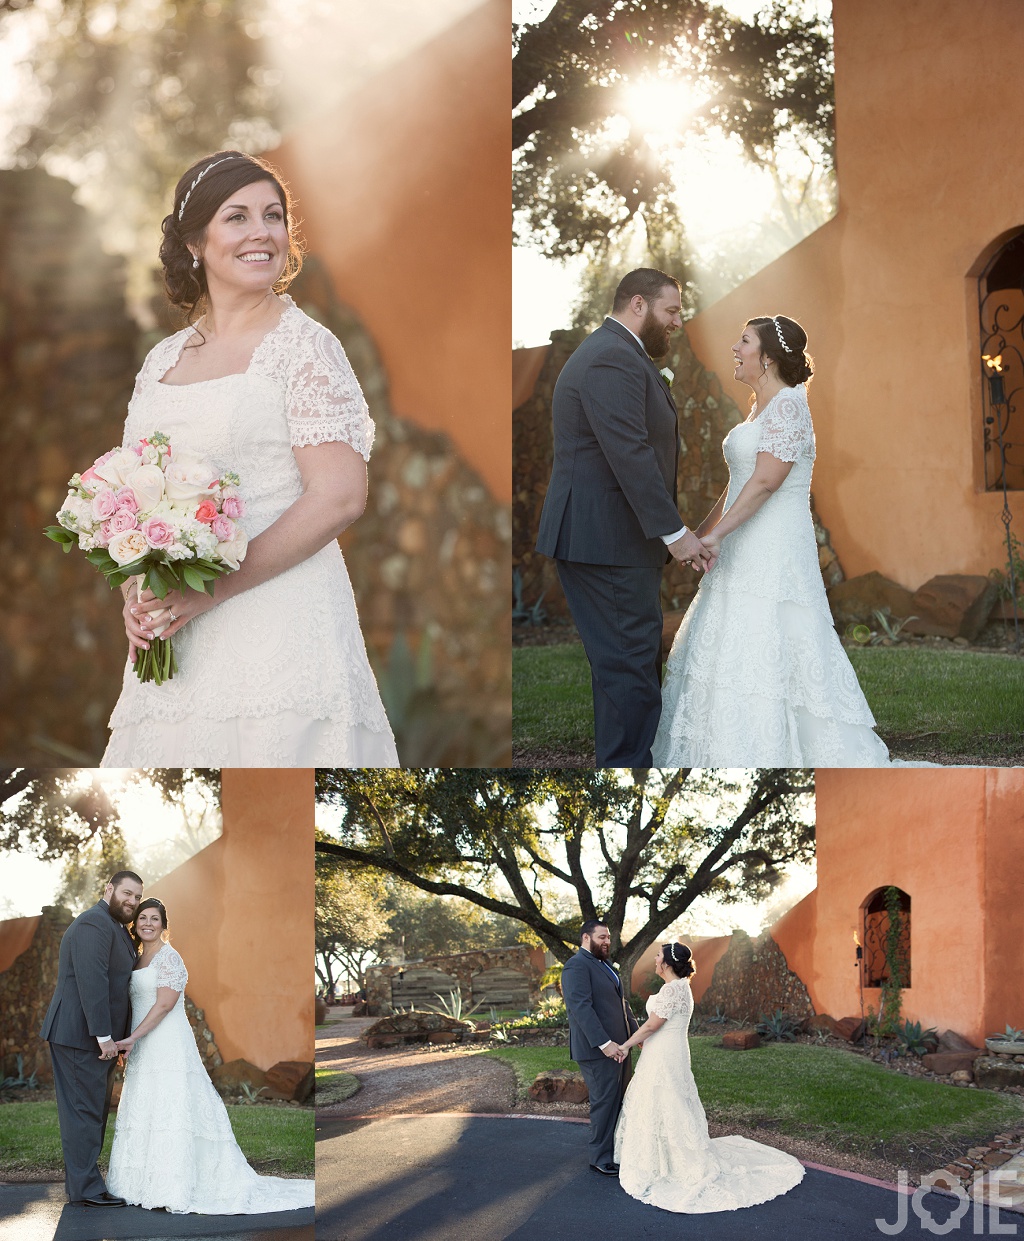 Outdoor wedding portraits at Agave Real by Joie Photographie